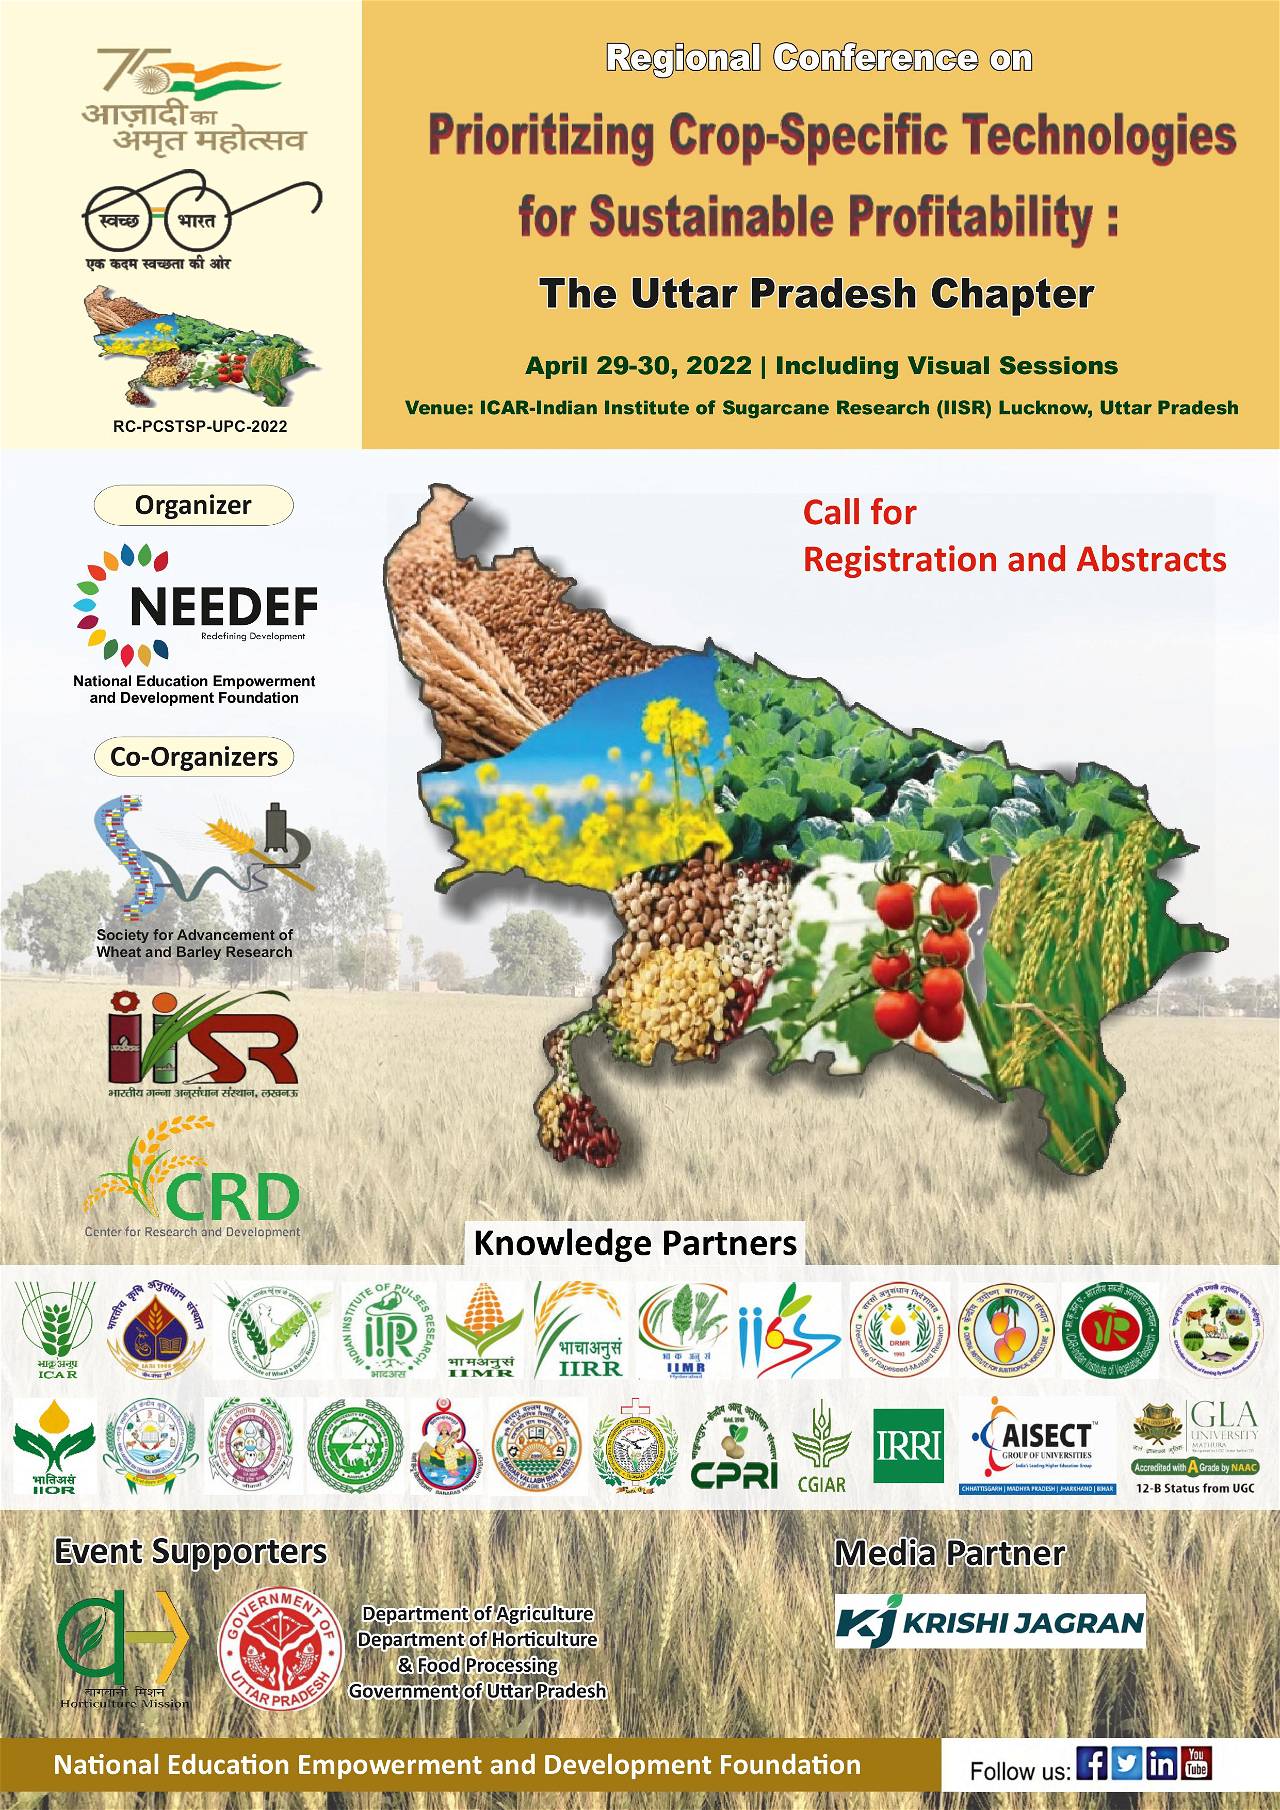 Regional Conference on Prioritizing Crop-Specific Technologies for Sustainable Profitability: The Uttar Pradesh Chapter